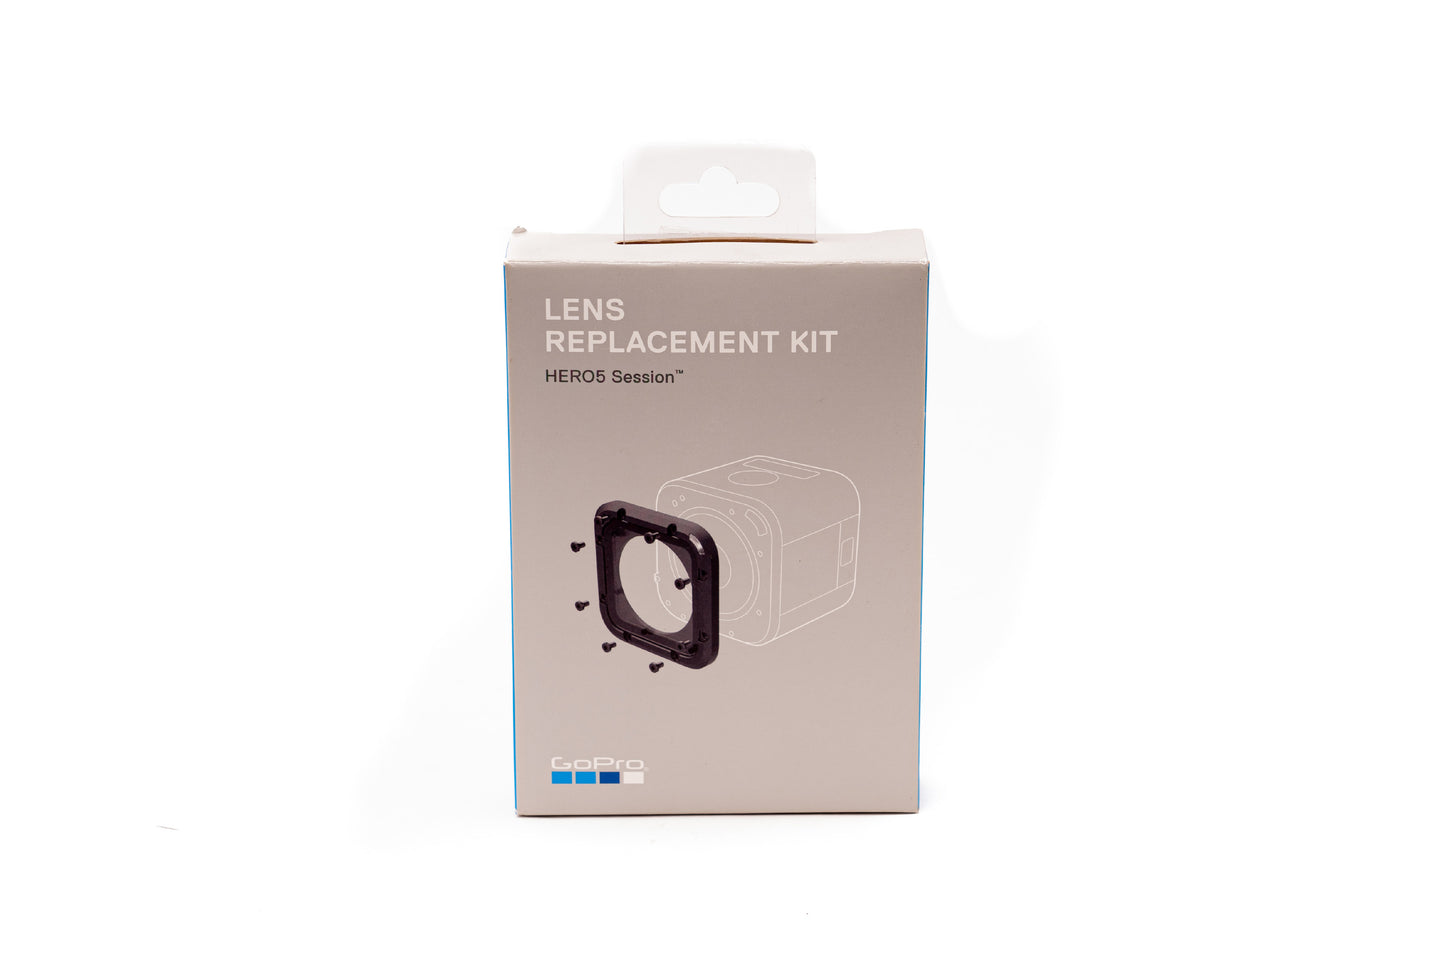 GOPRO LENS REPLACEMENT KIT FOR HERO5 SESSION